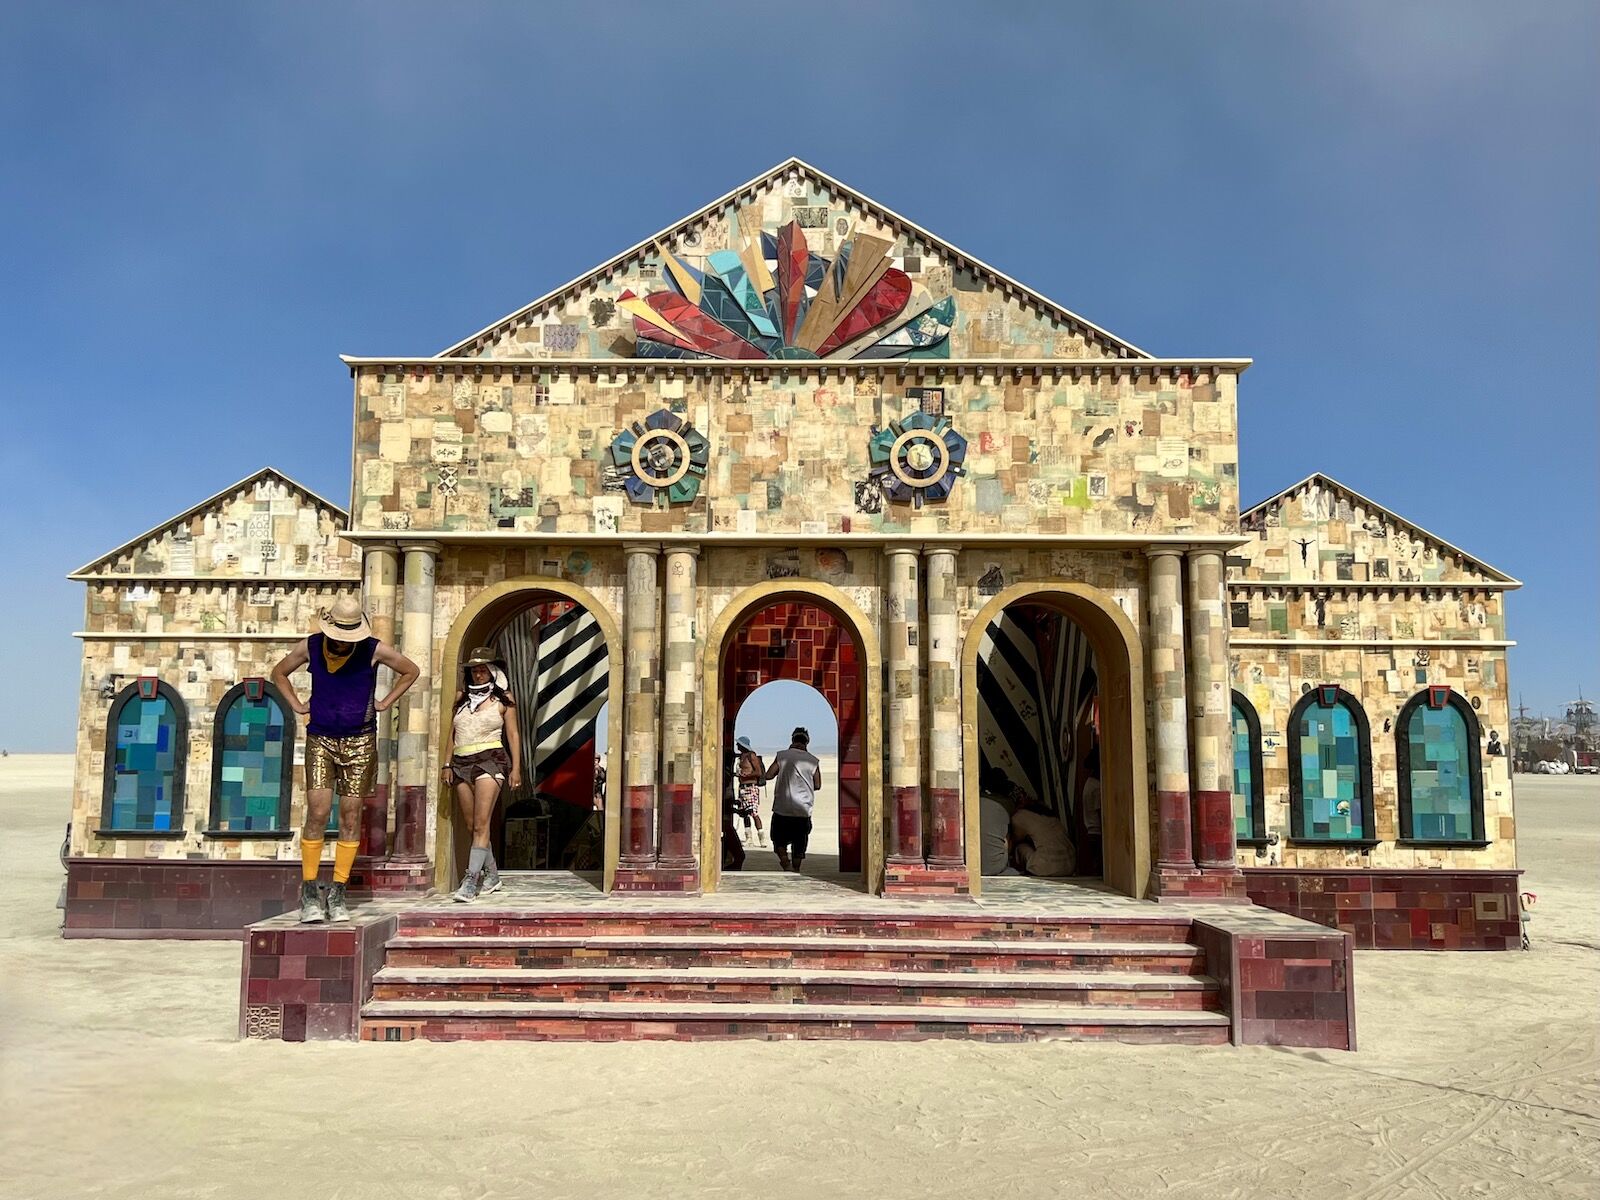 Art from Burning Man 2022: "Unbound: A Library in Transition" by Julia Nelson-Gal rethinks